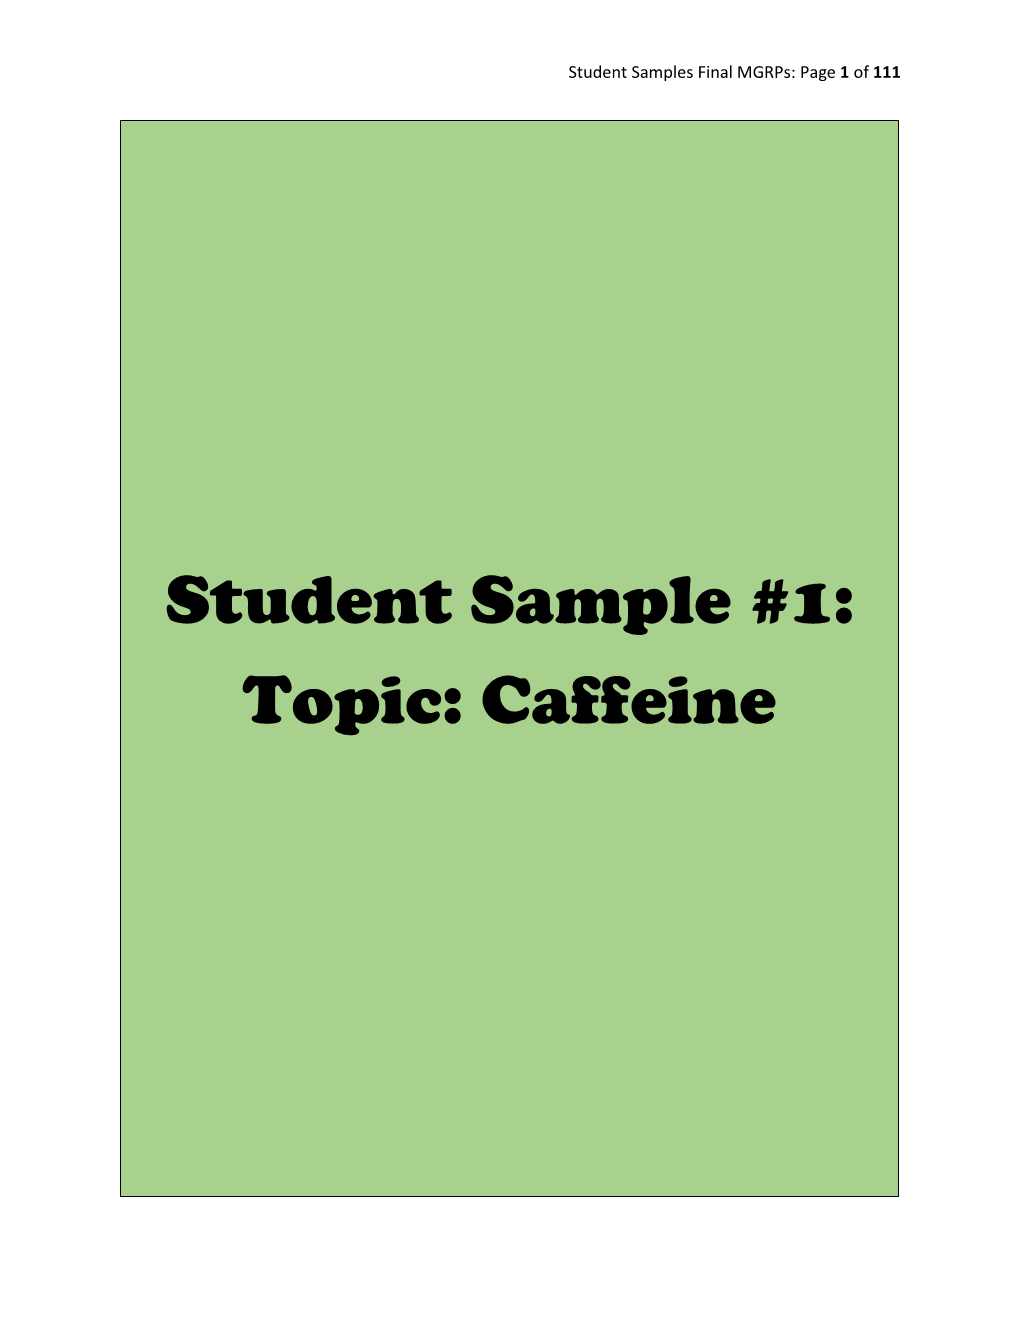 Student Sample #1: Topic: Caffeine Student Samples Final Mgrps: Page 2 of 111